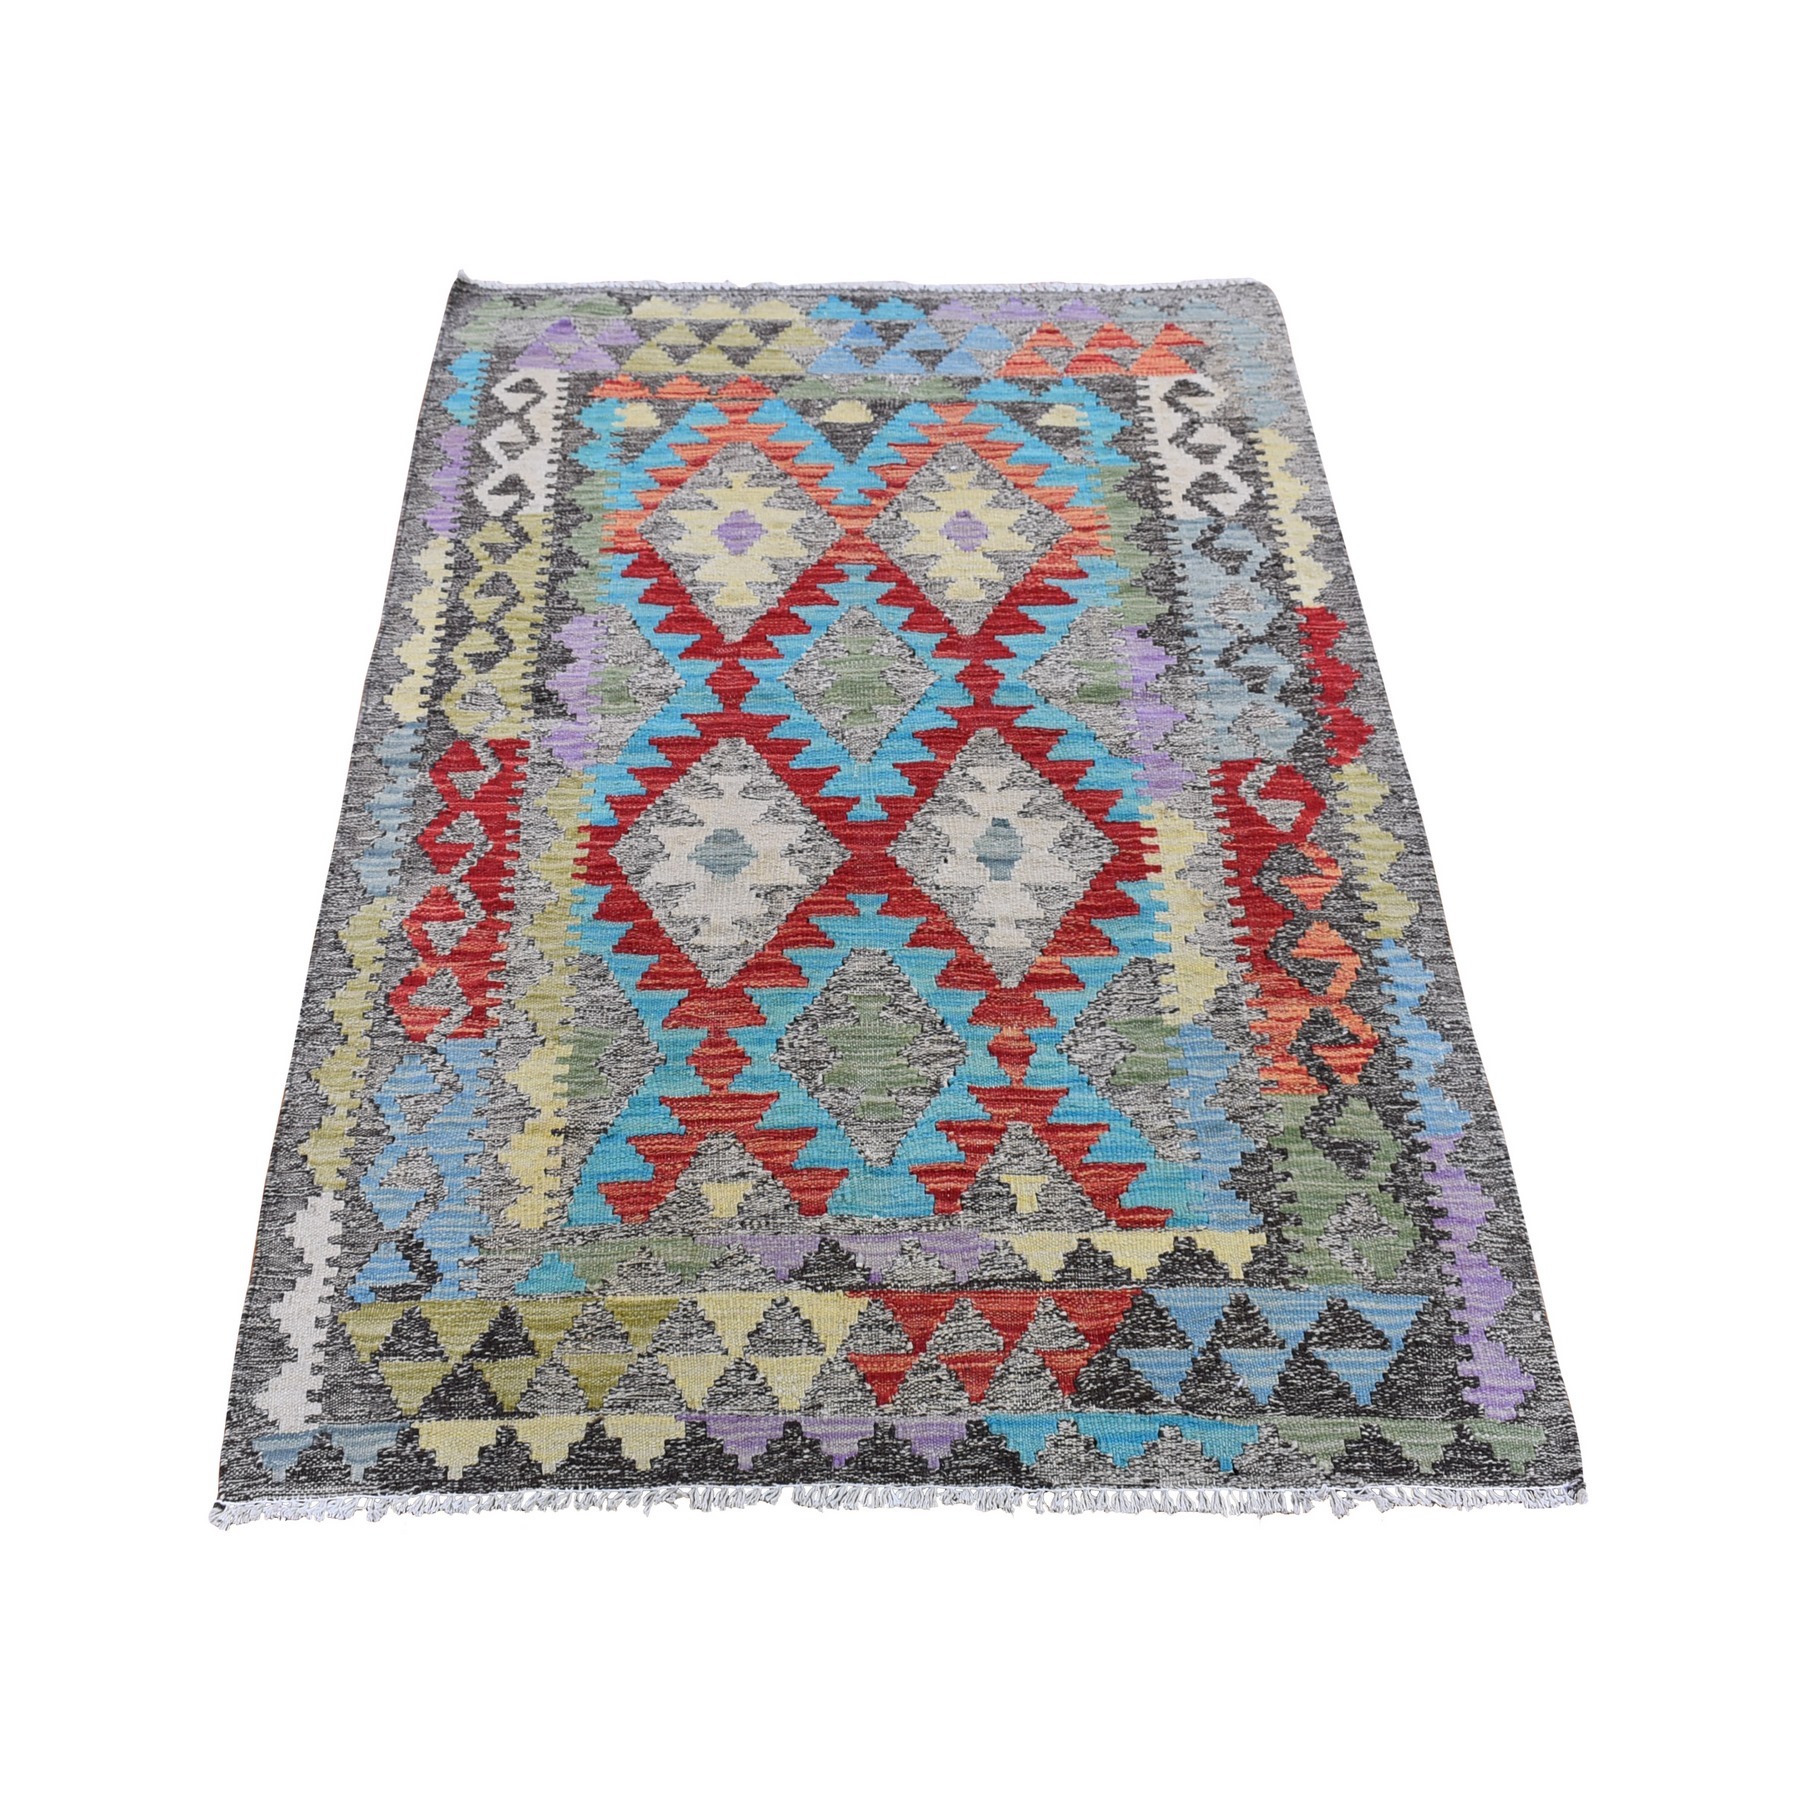 Traditional Wool Hand-Woven Area Rug 3'2